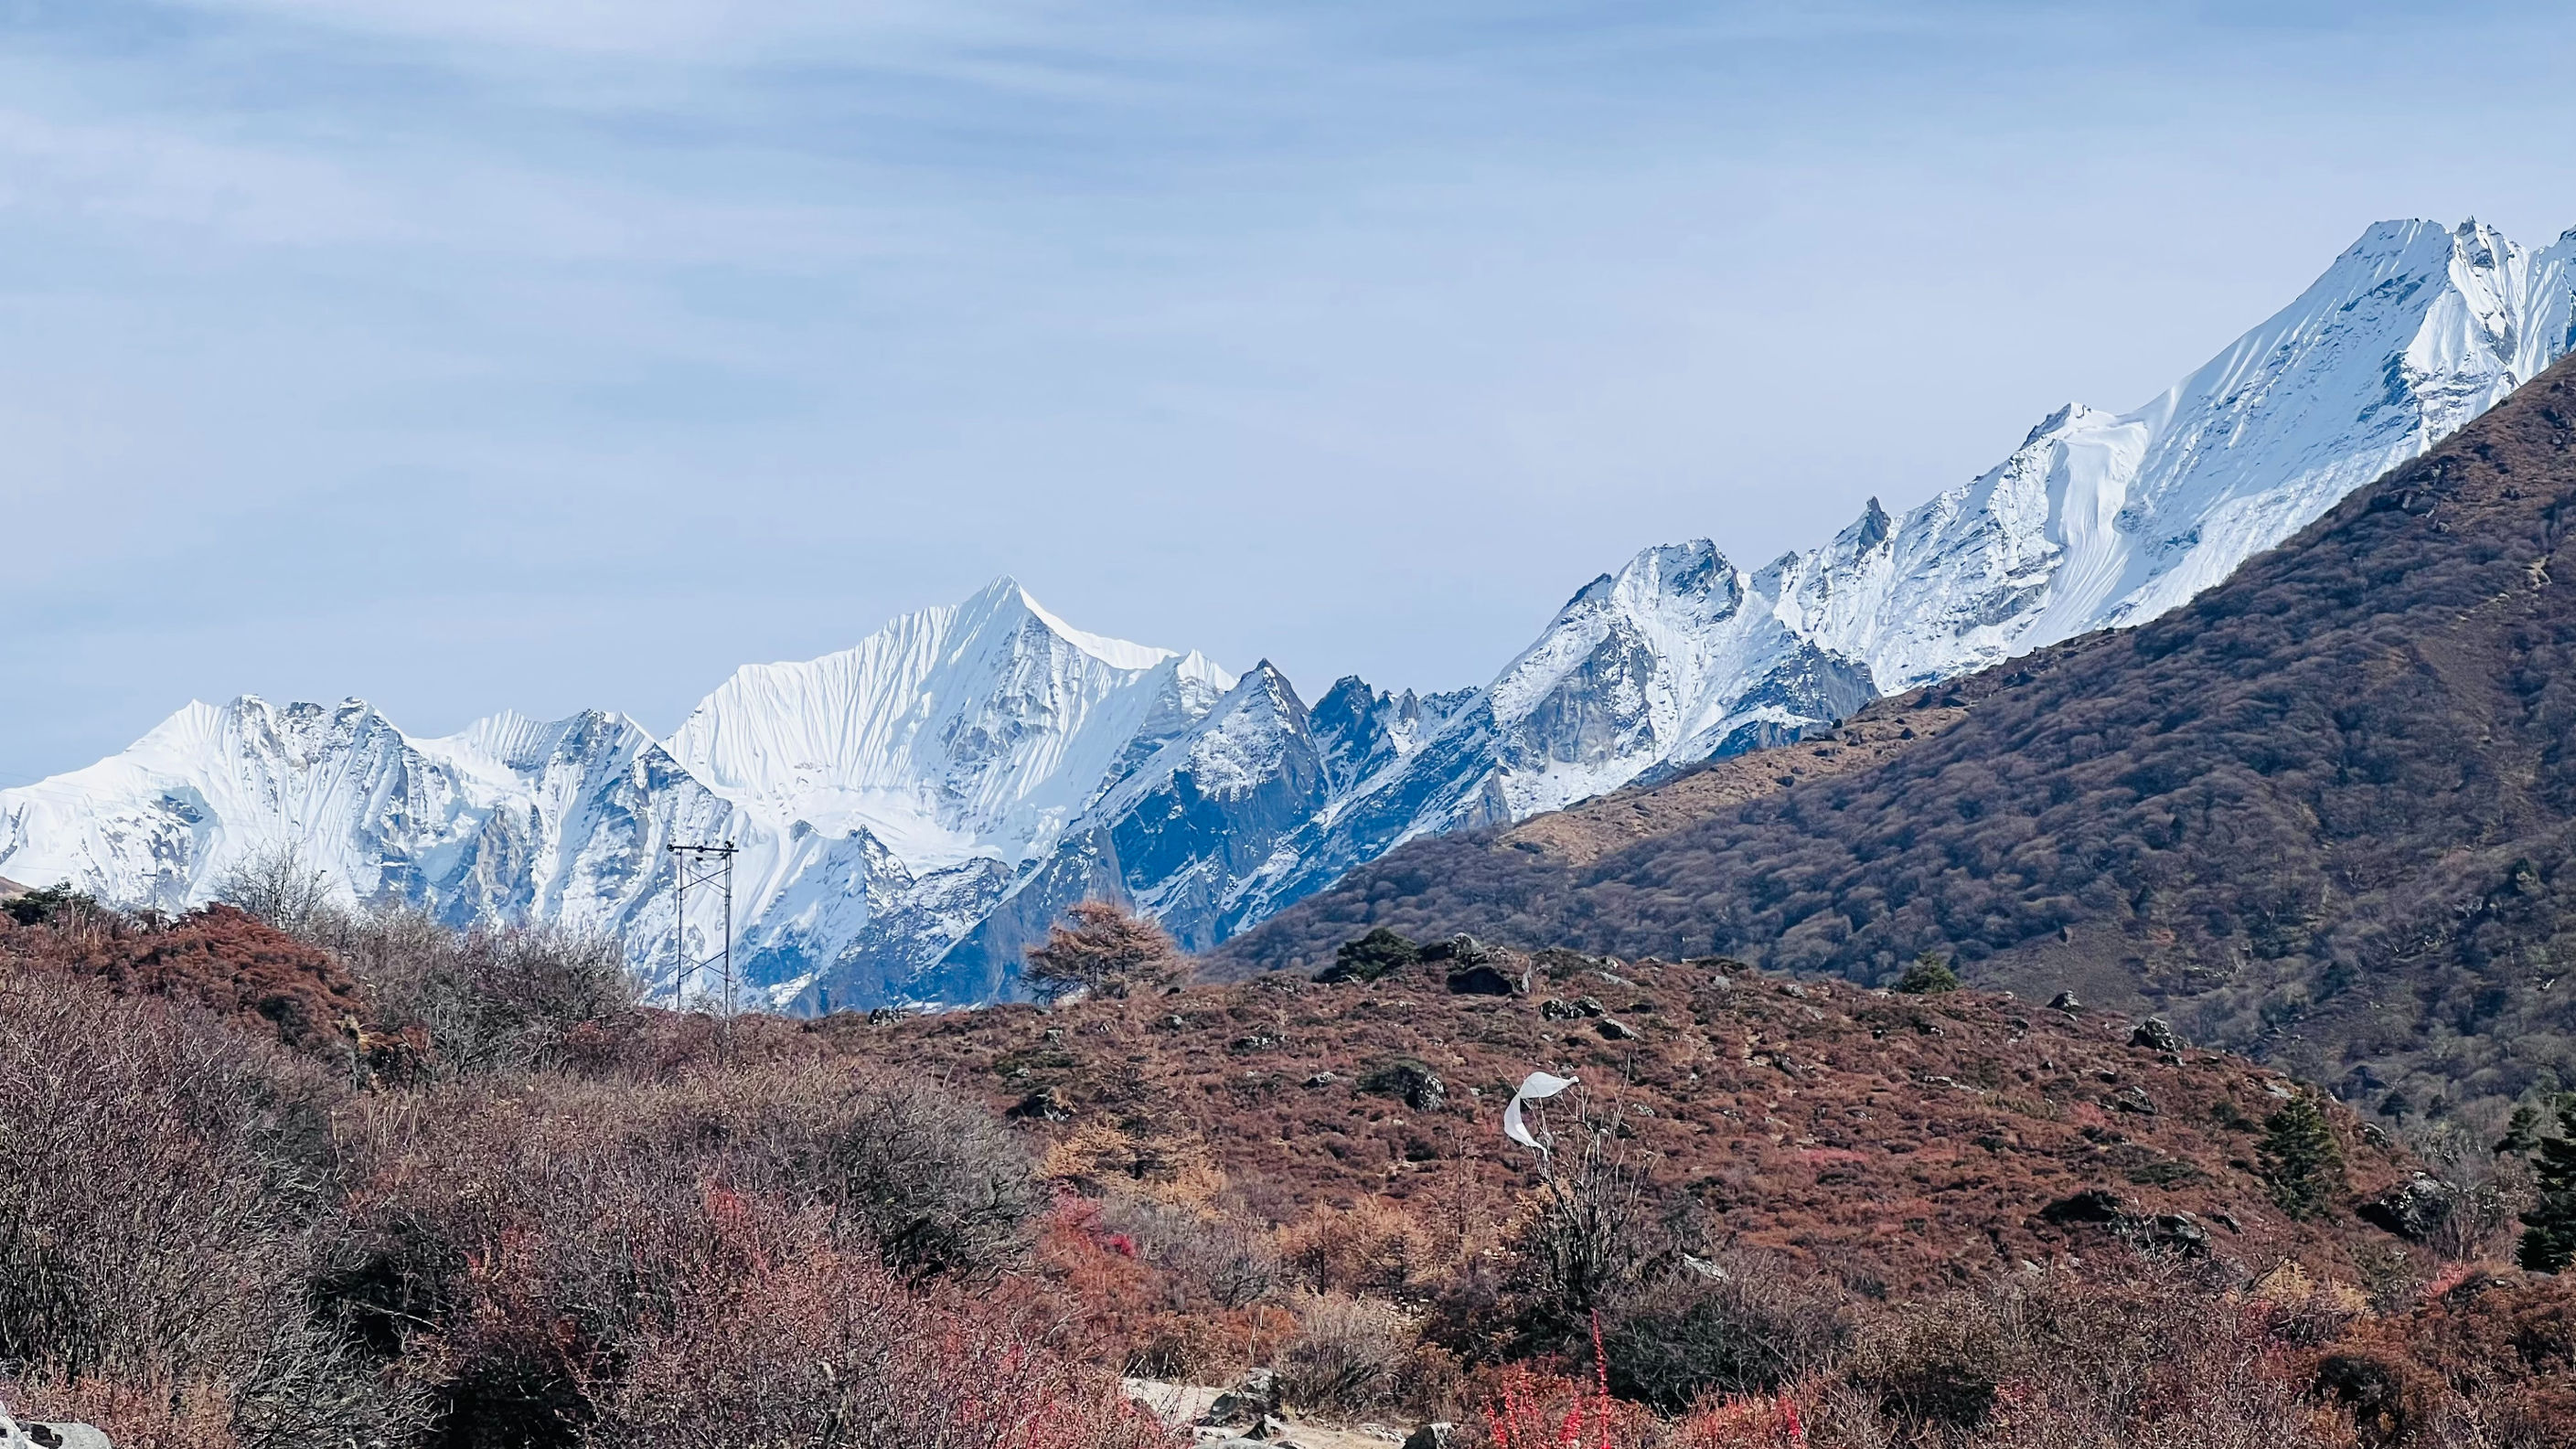 Unlocking the Majesty of the Himalayas: The Langtang Valley Trek